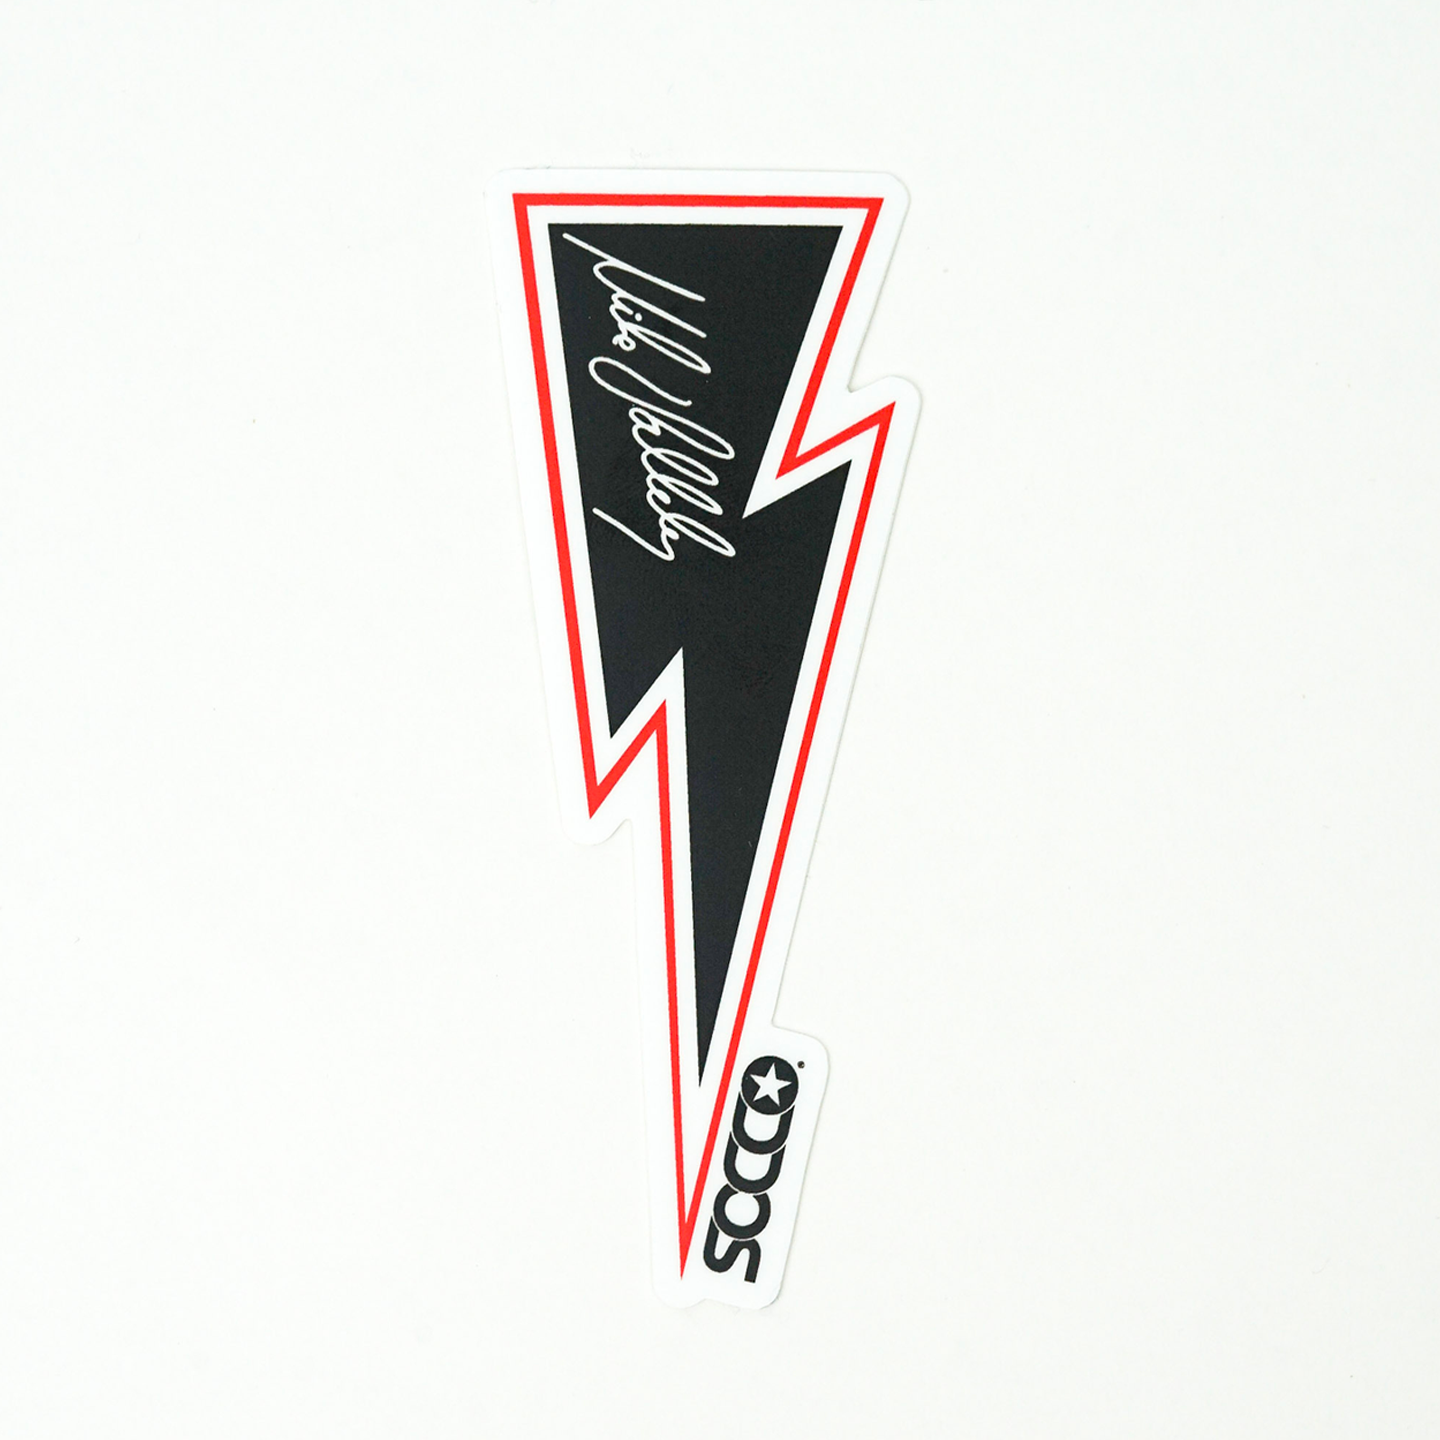 SOCCO Organics | Mike Vallely Organic Lightning Bolts | Red Stripes